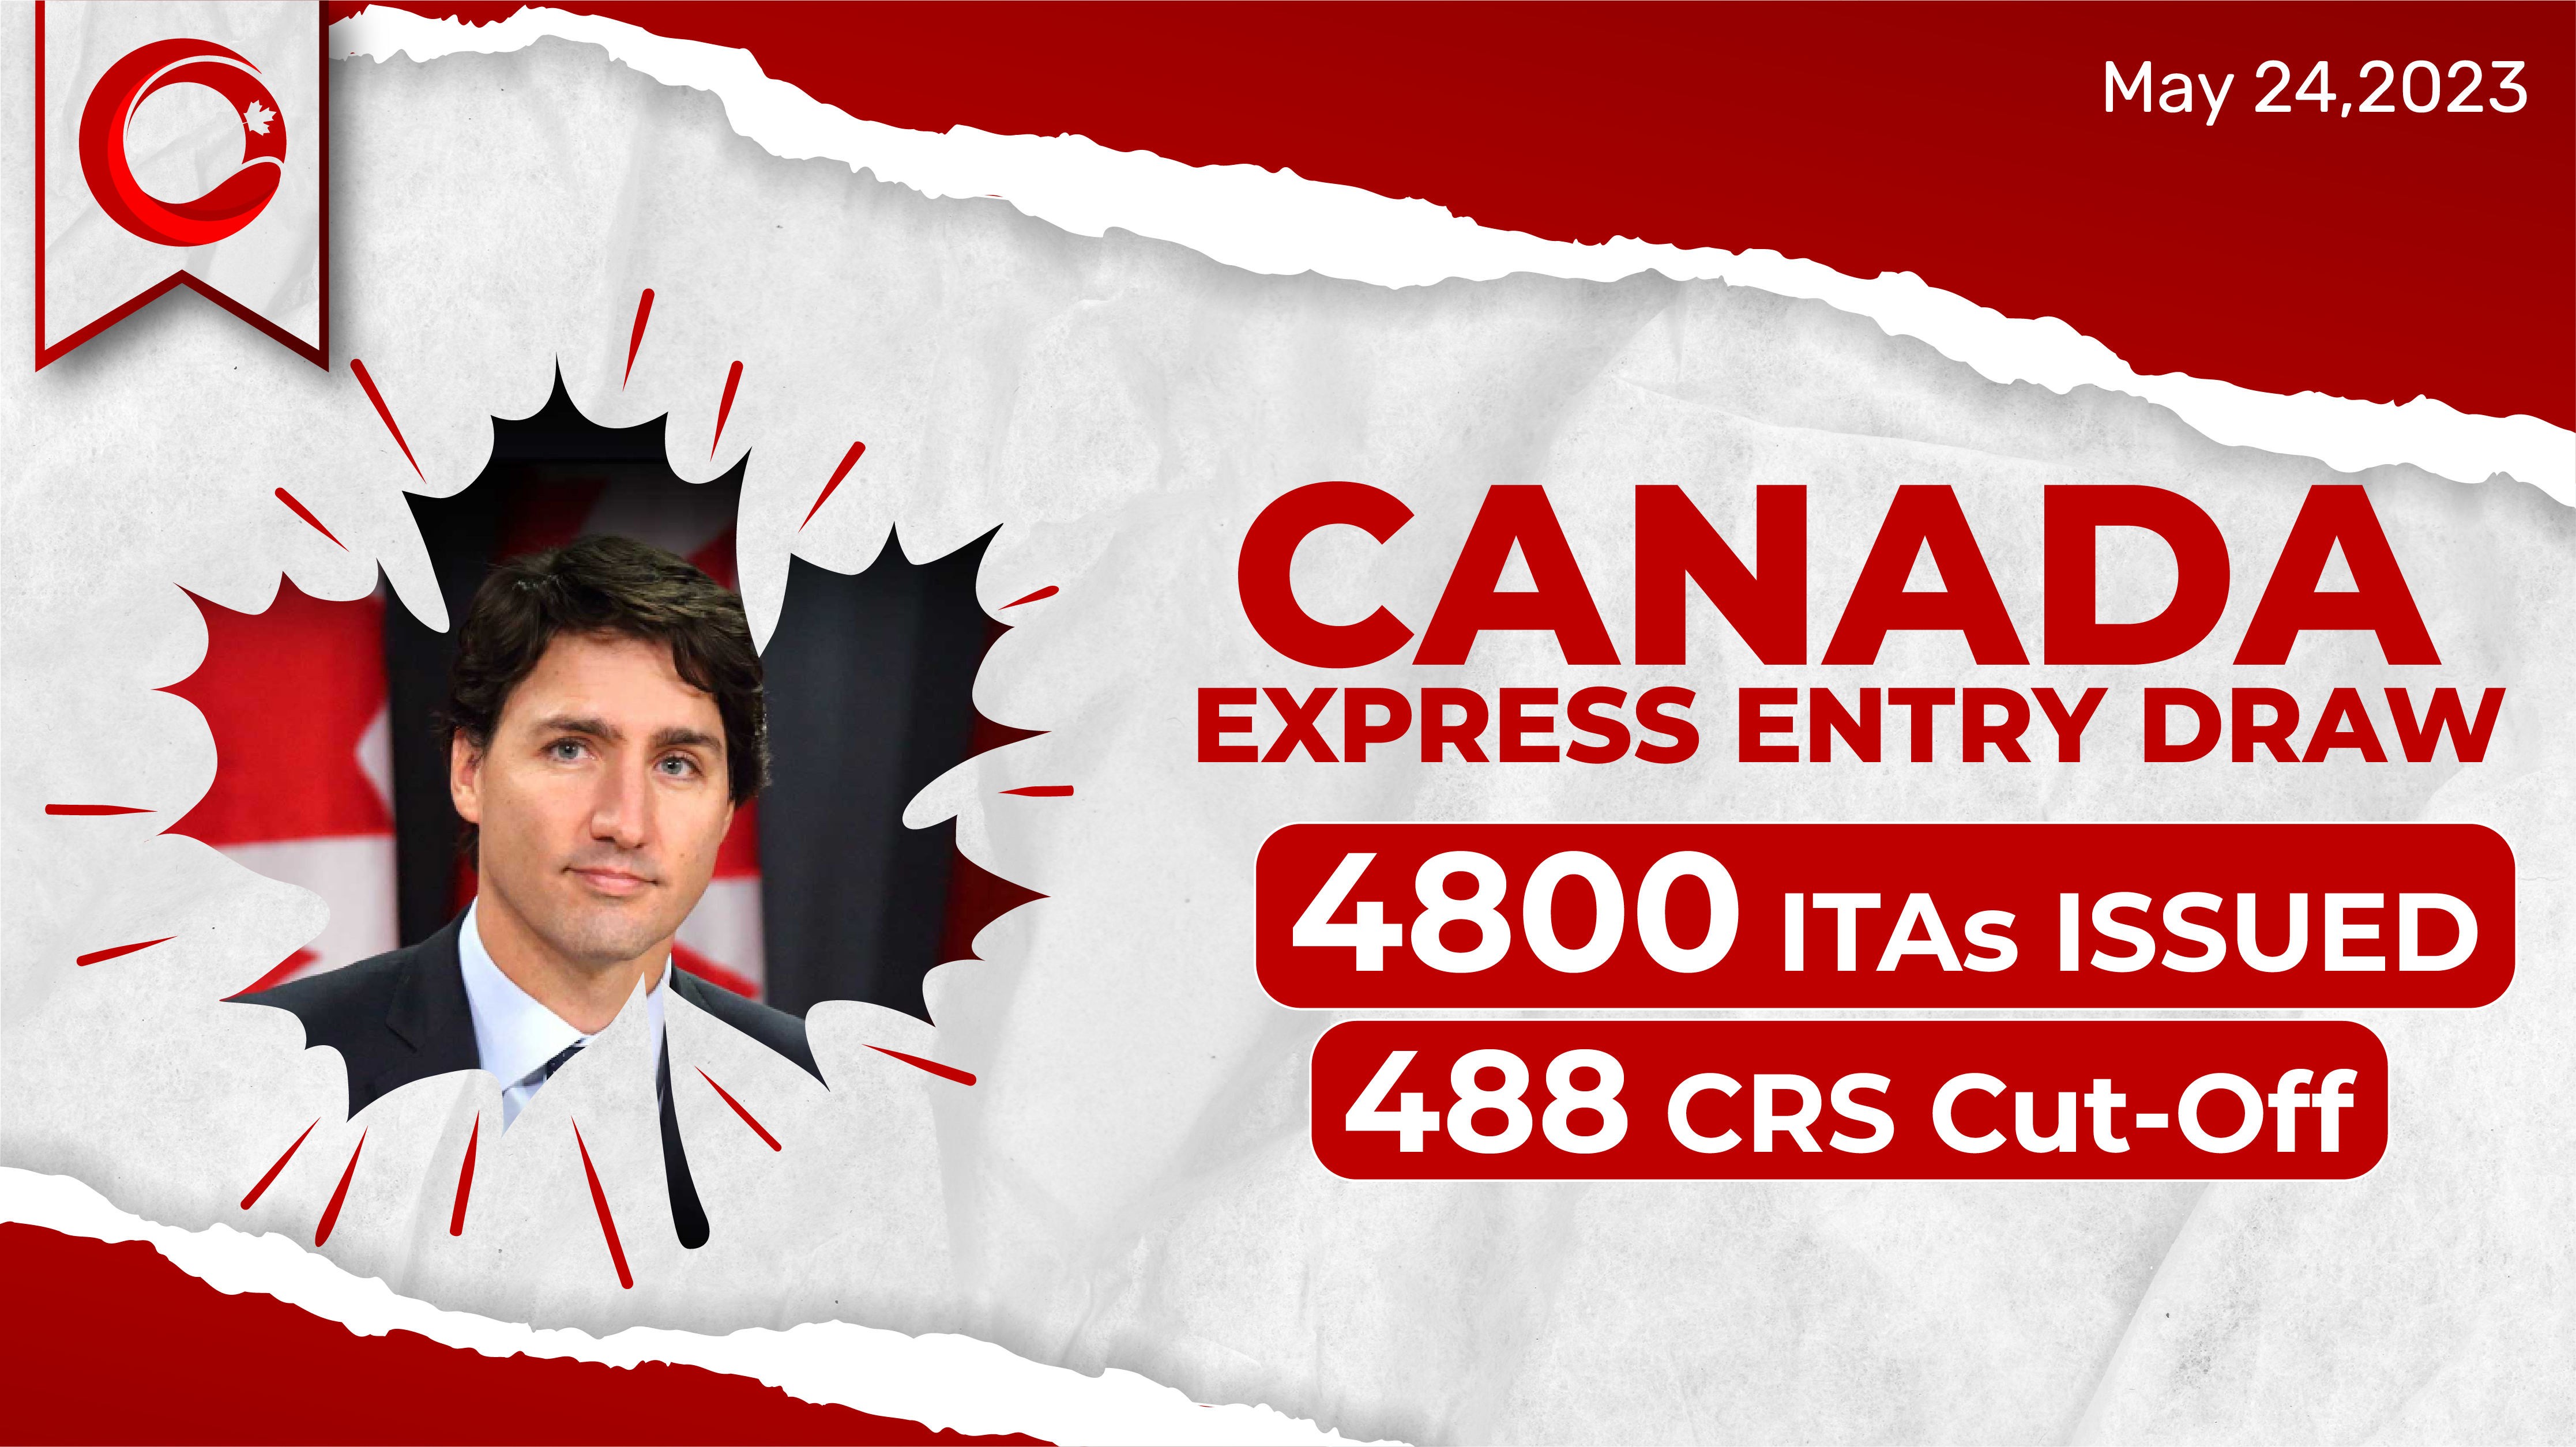 EXPRESS ENTRY DRAW, LATEST EXPRESS ENTRY DRAW., EXPRESS ENTRY DRAW IN 2023, CANADA PR